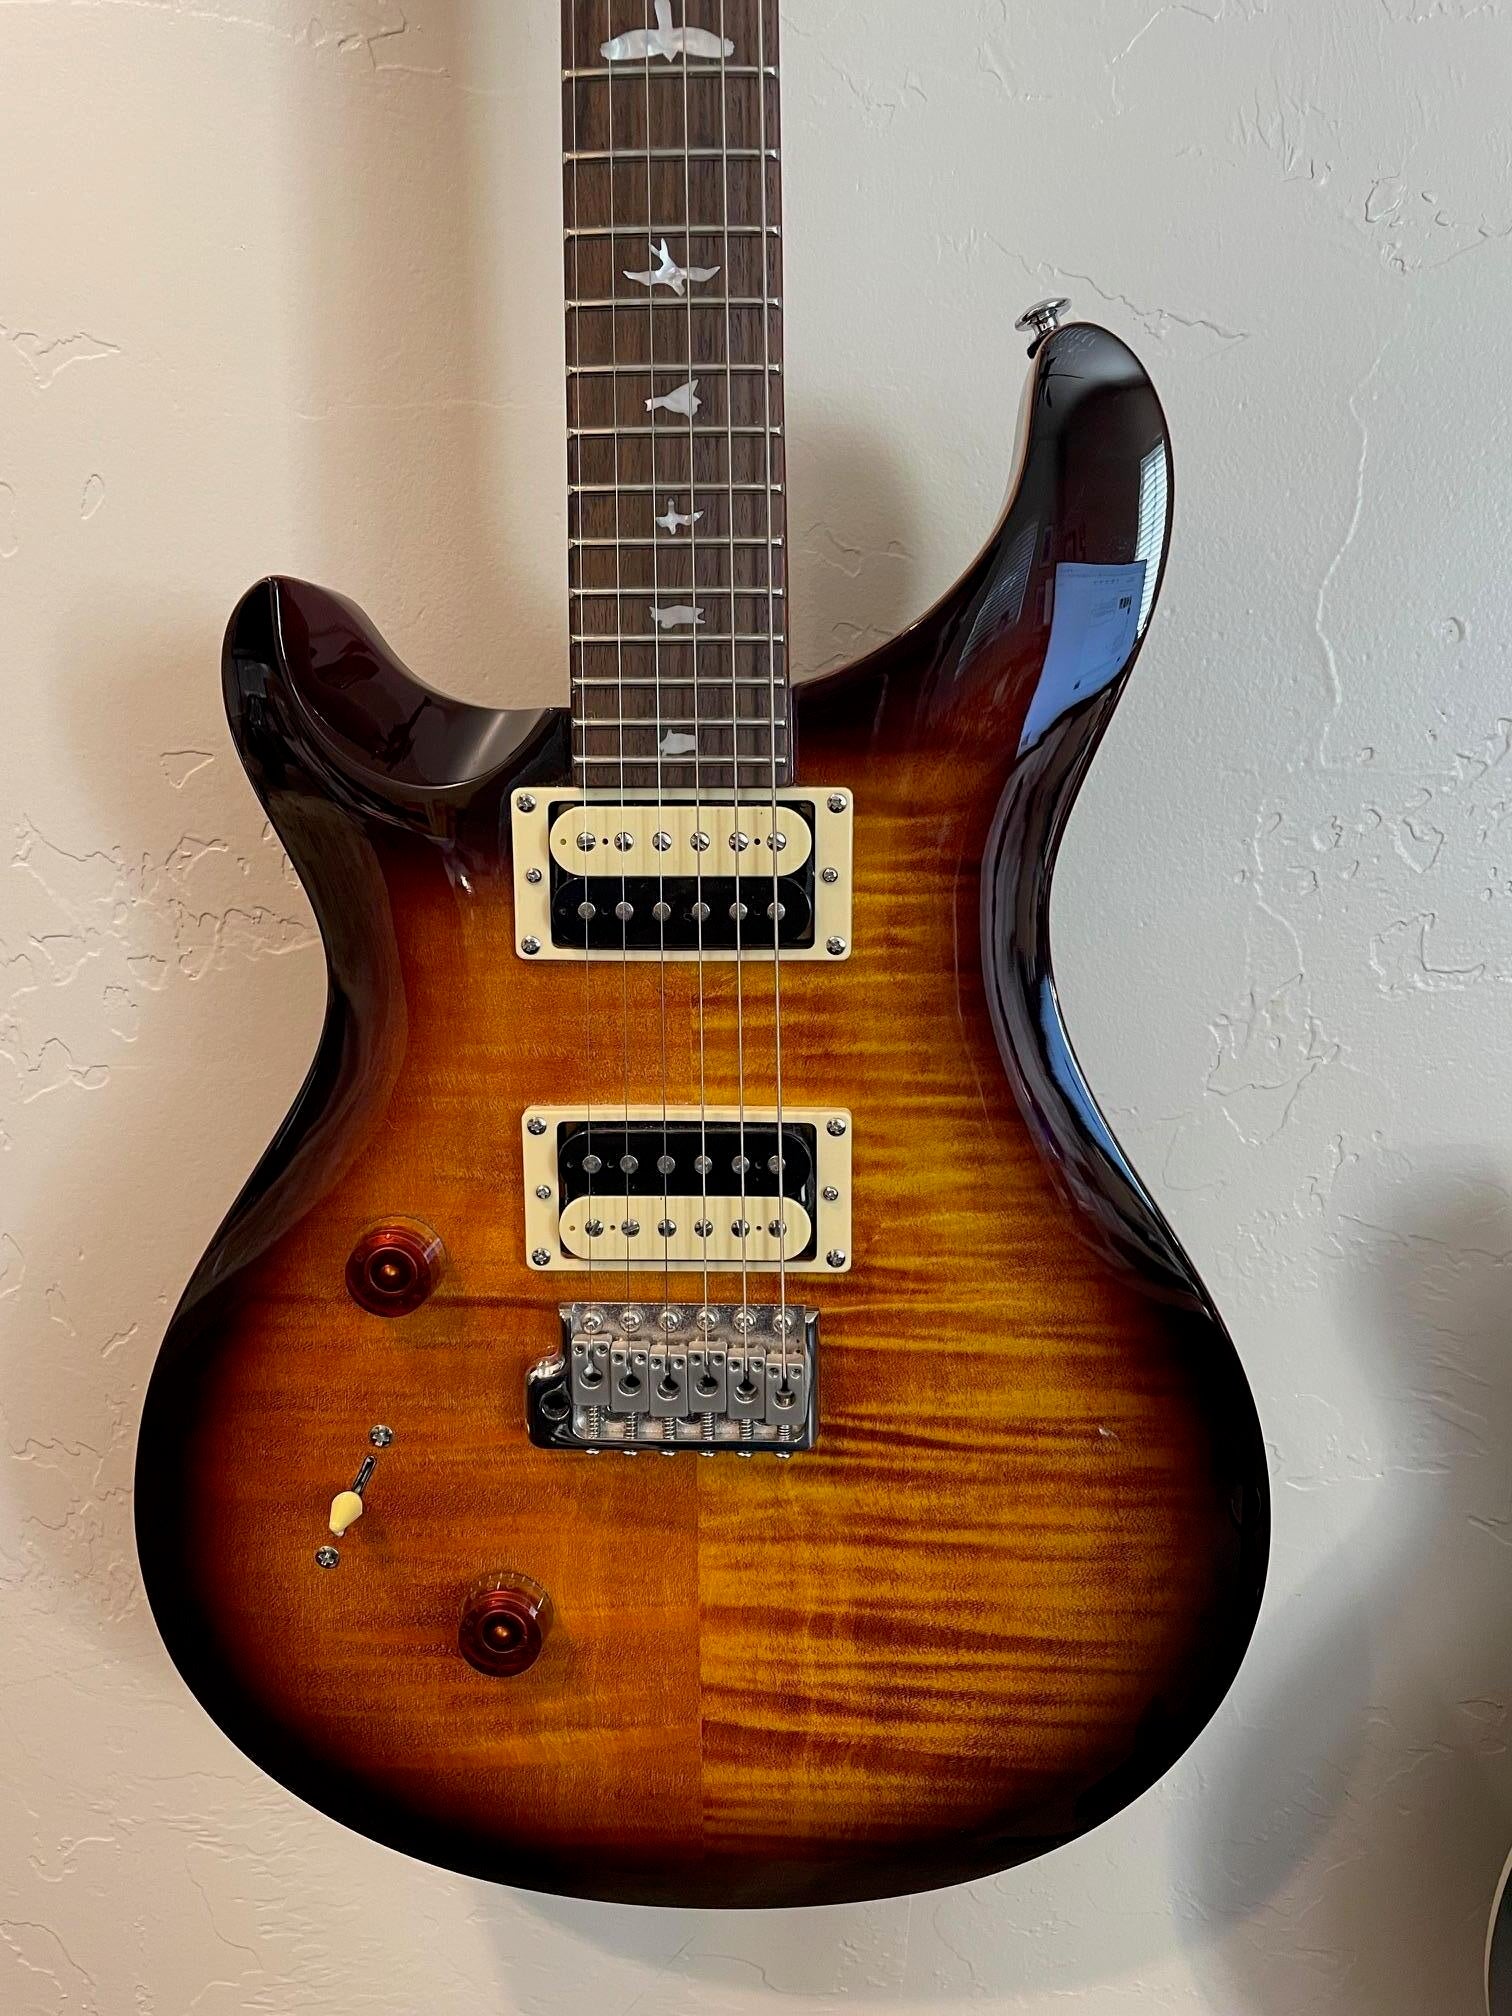 Used PRS SE Custom 24 Left handed in Tobacco - Sweetwater's Gear 